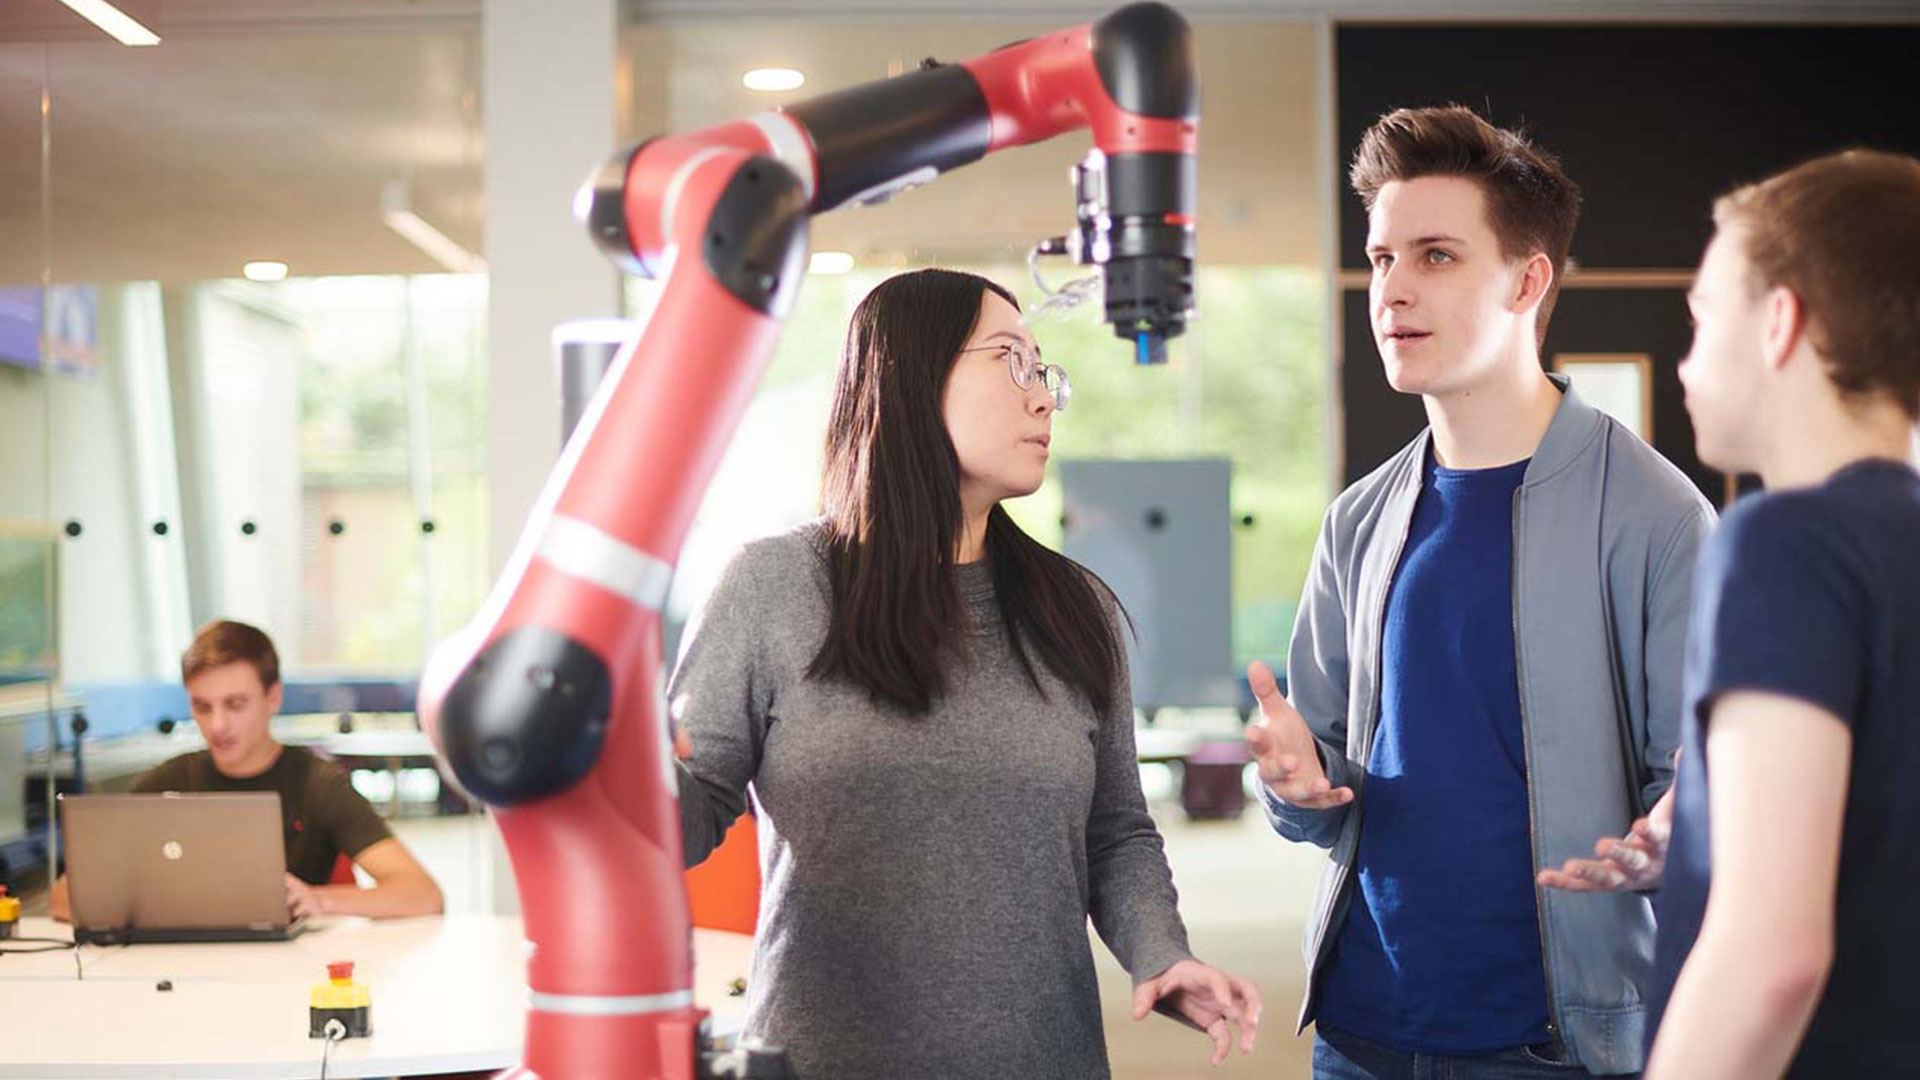 Three students chat in front of a robotic arm